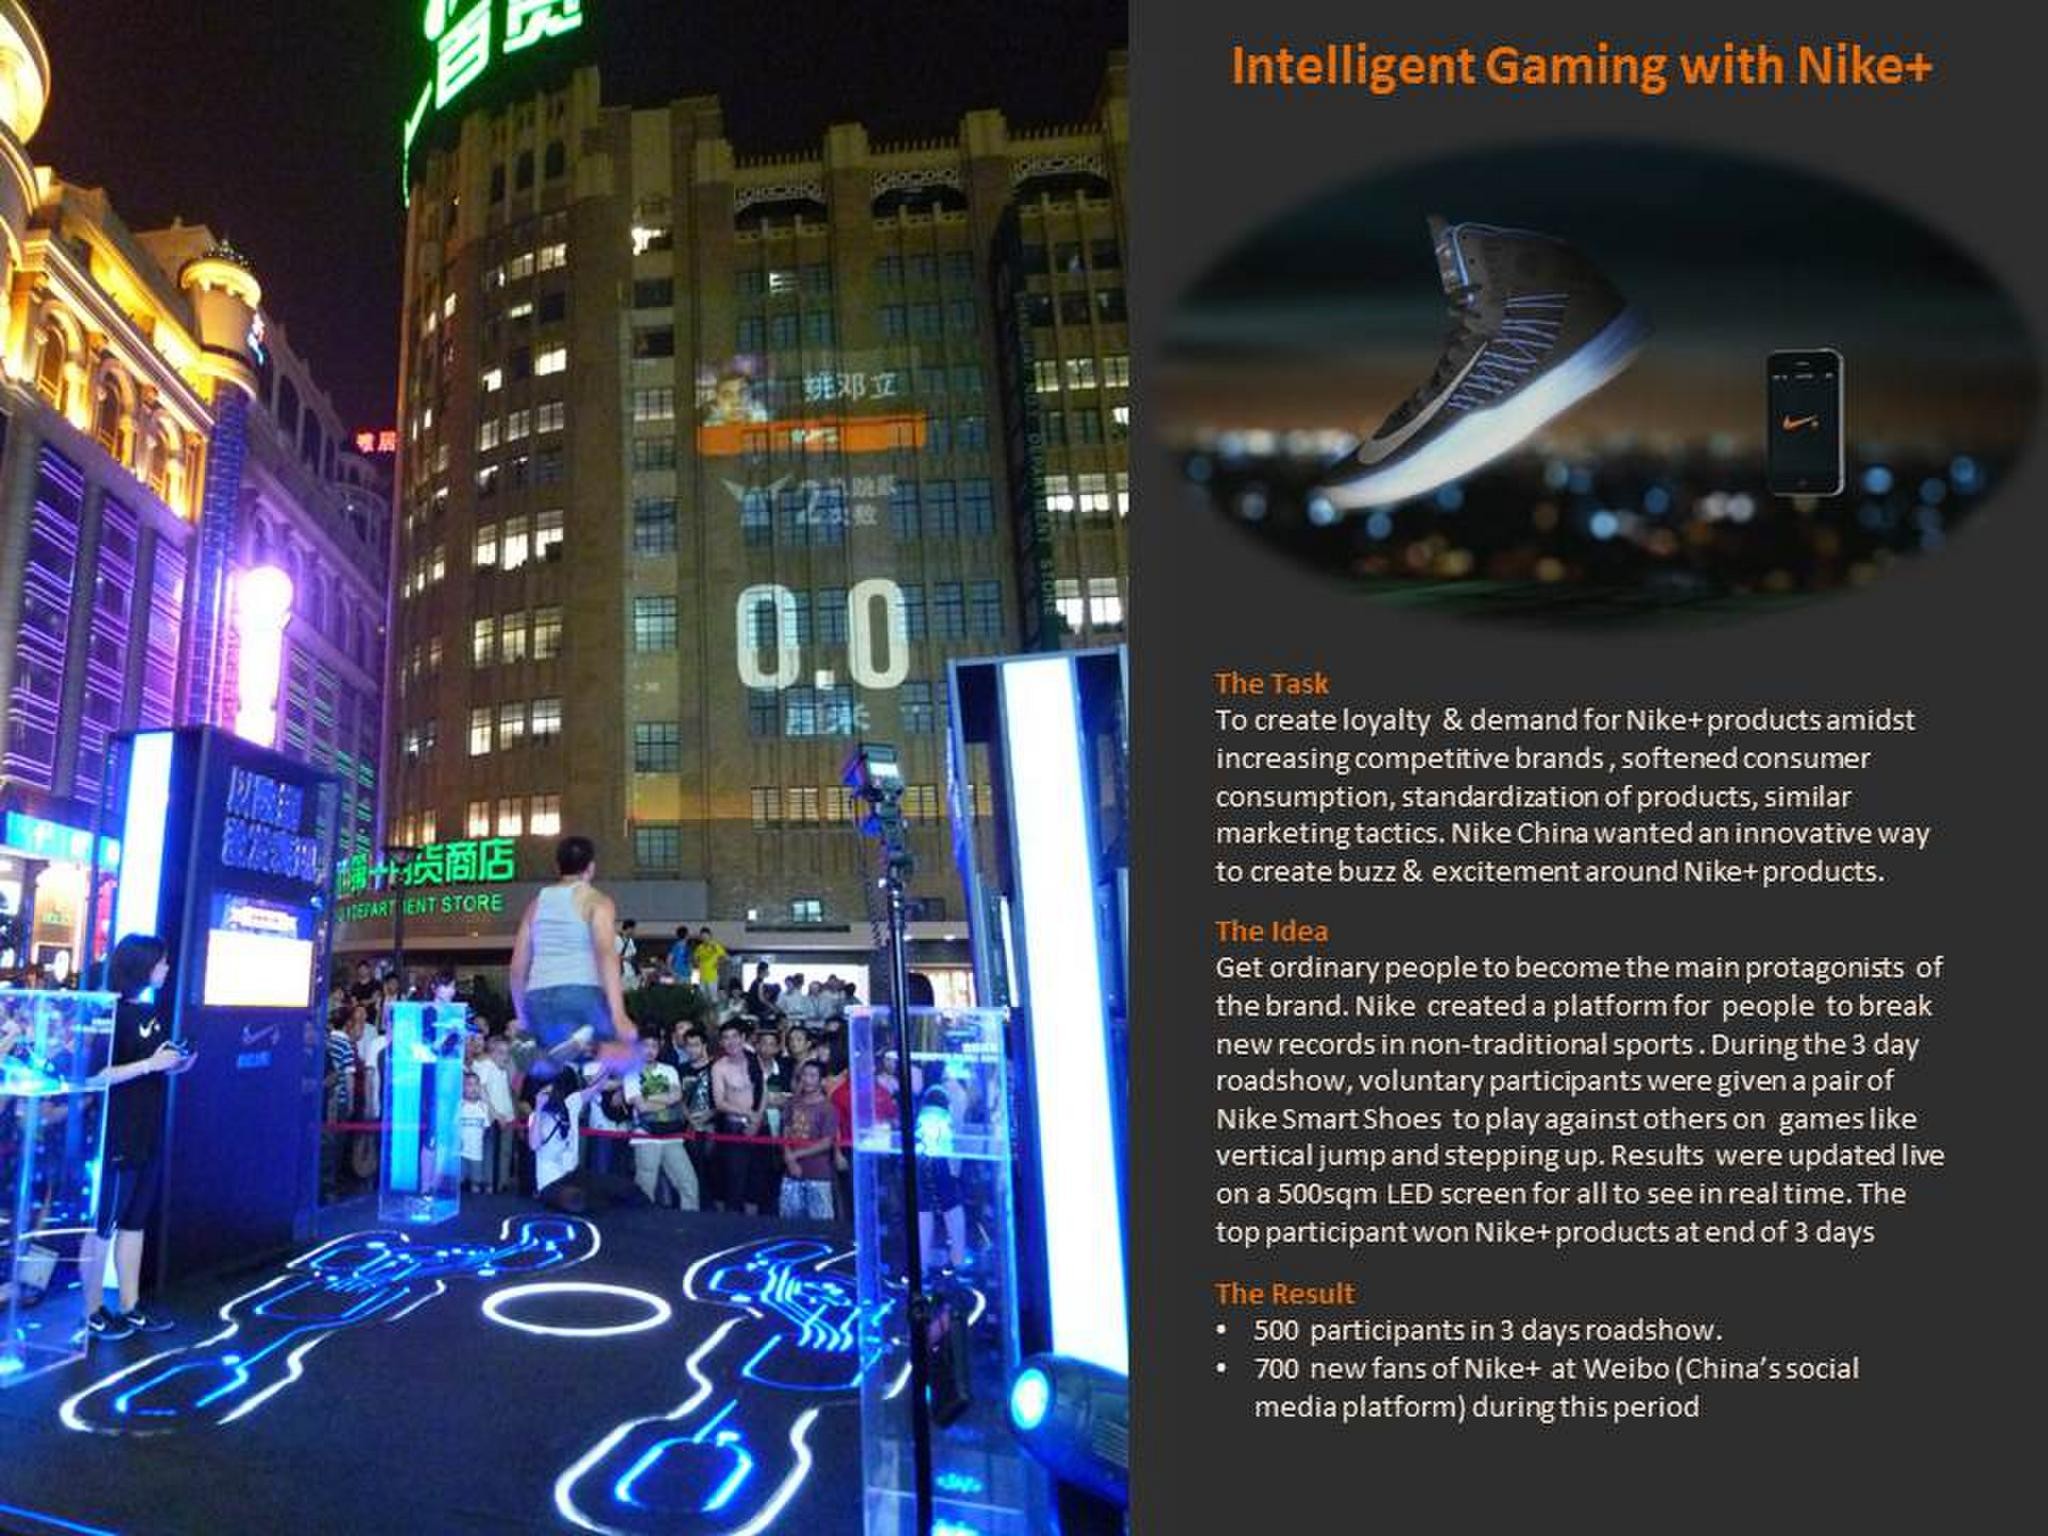 INTELLIGENT BEATING AND GAMING WITH NIKE+